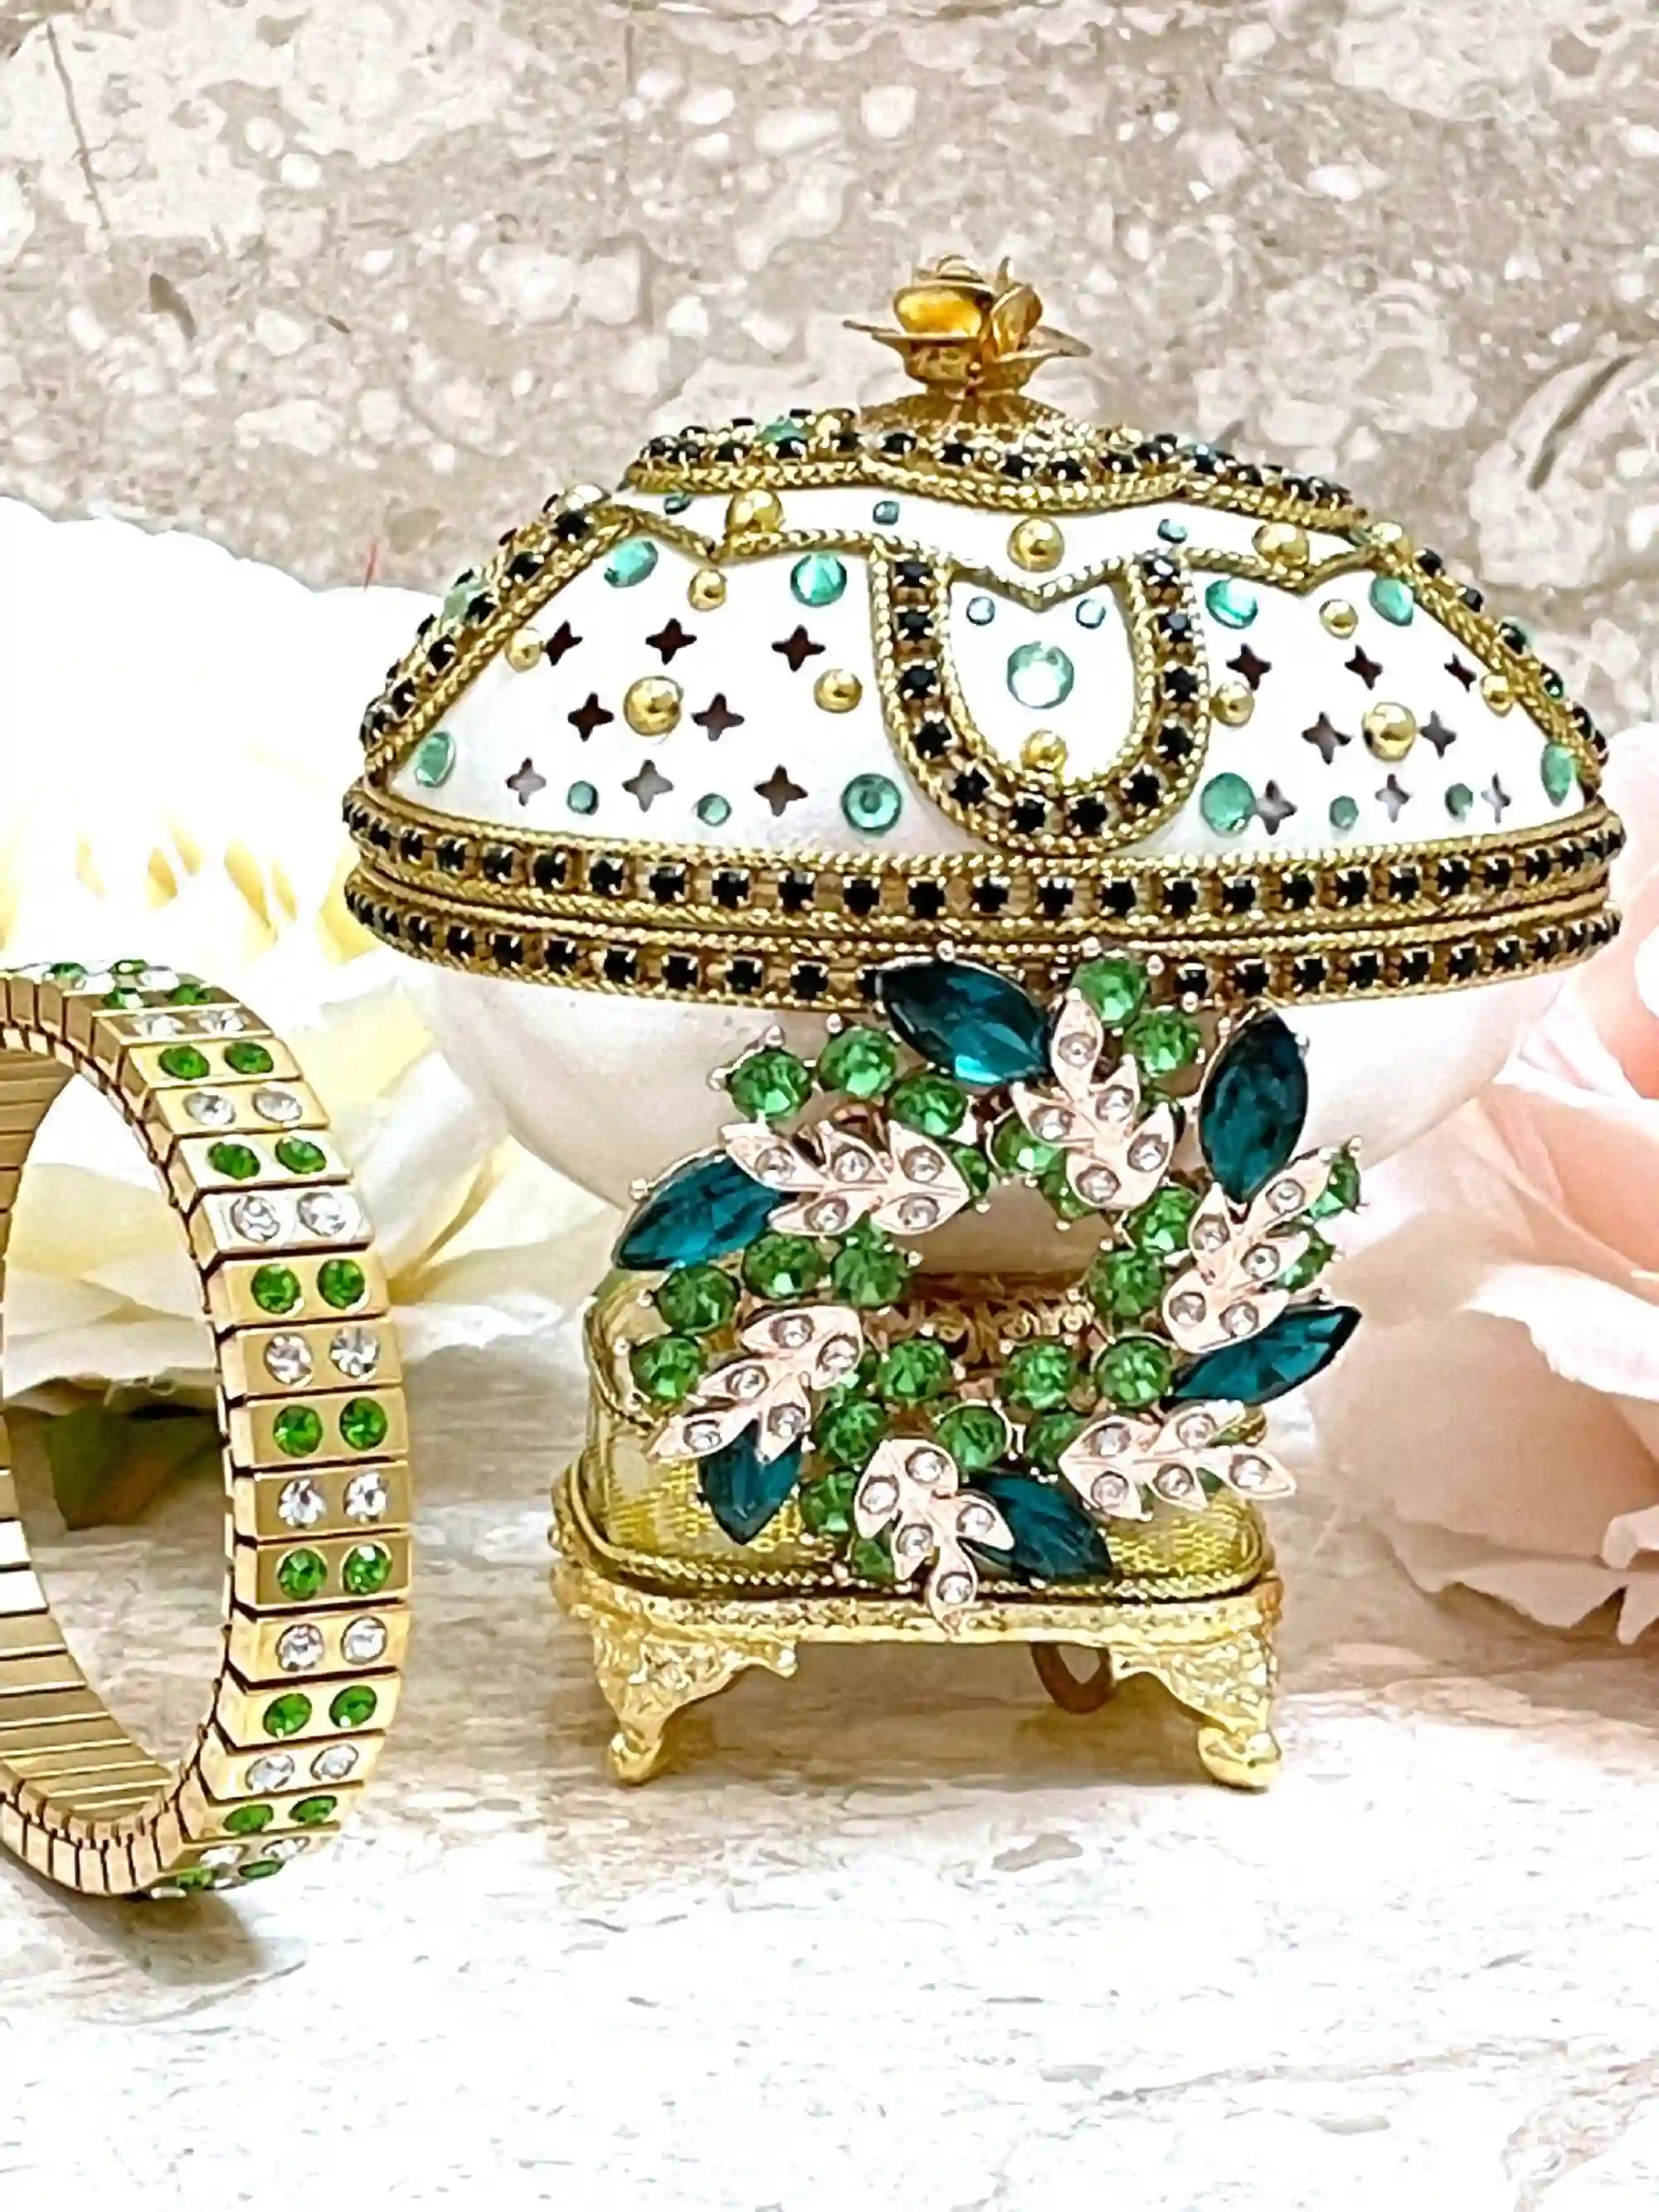 UNIQUE Faberge Egg Style 24k EMERALD Olive Wreath Engagement Ornament Proposal Ring box Gift for her Faberge egg Engagement Gift Fiance Wife 